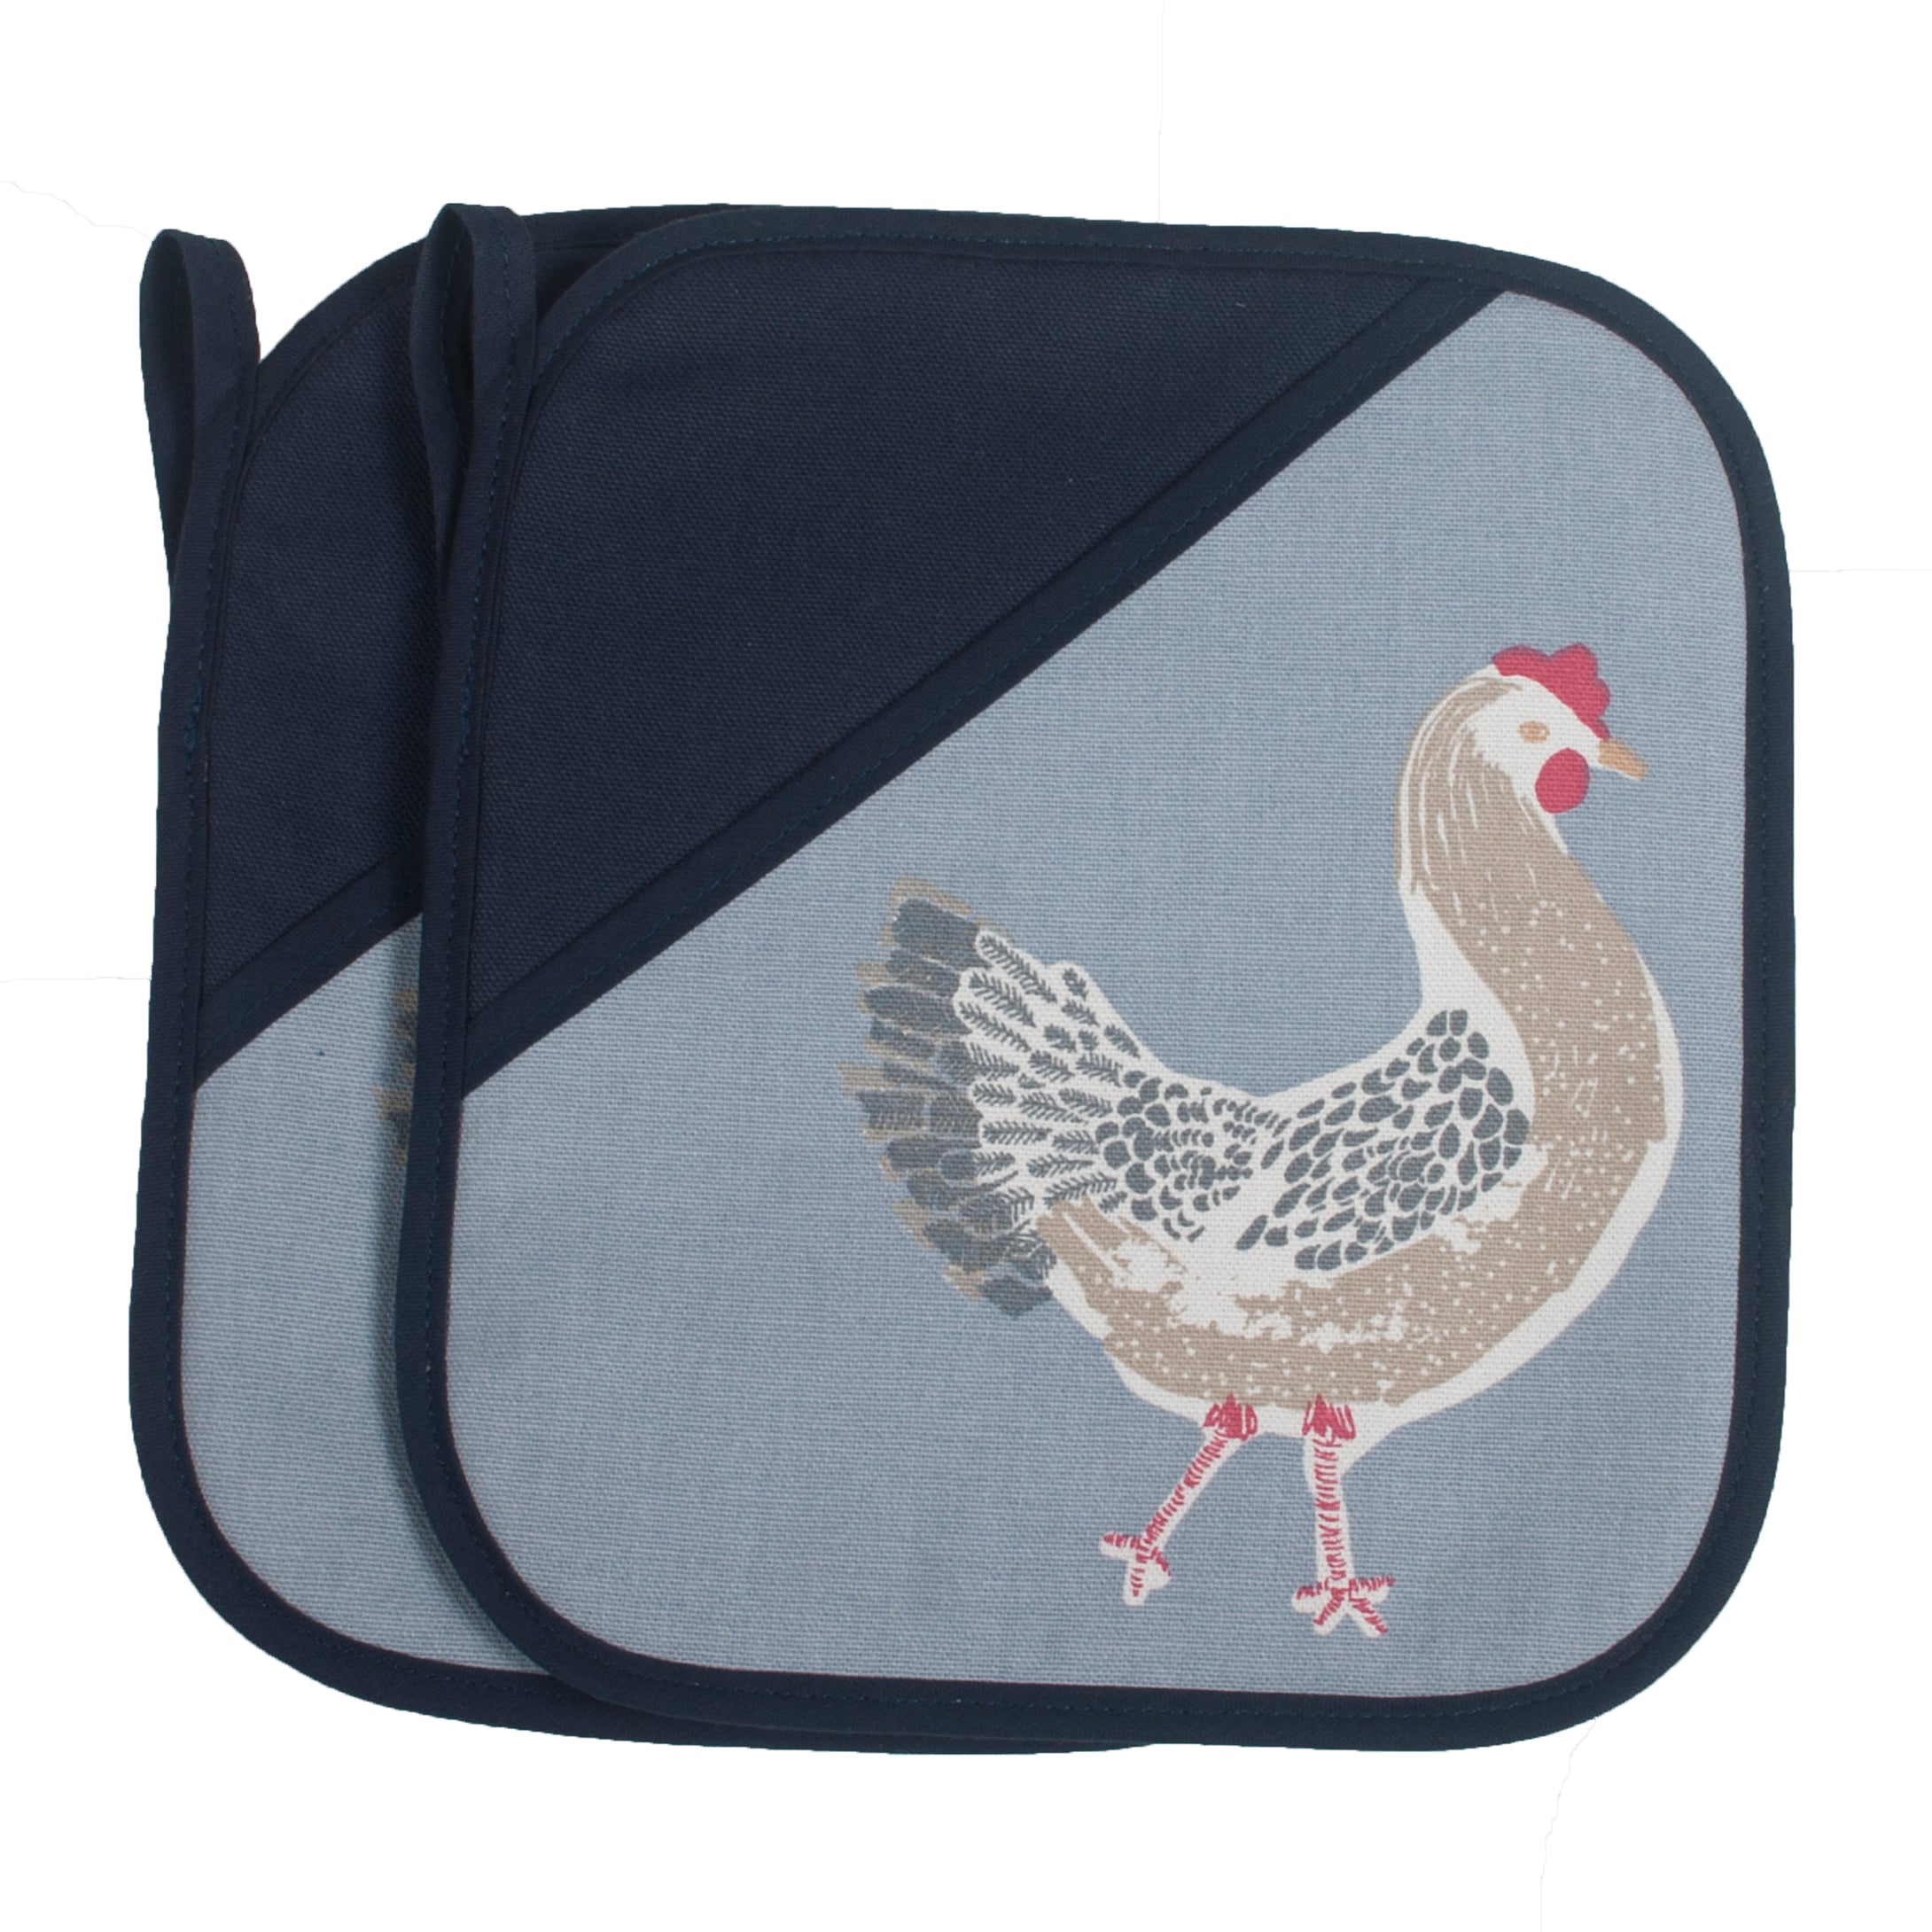 Oven Grippers, Chickens (pair)